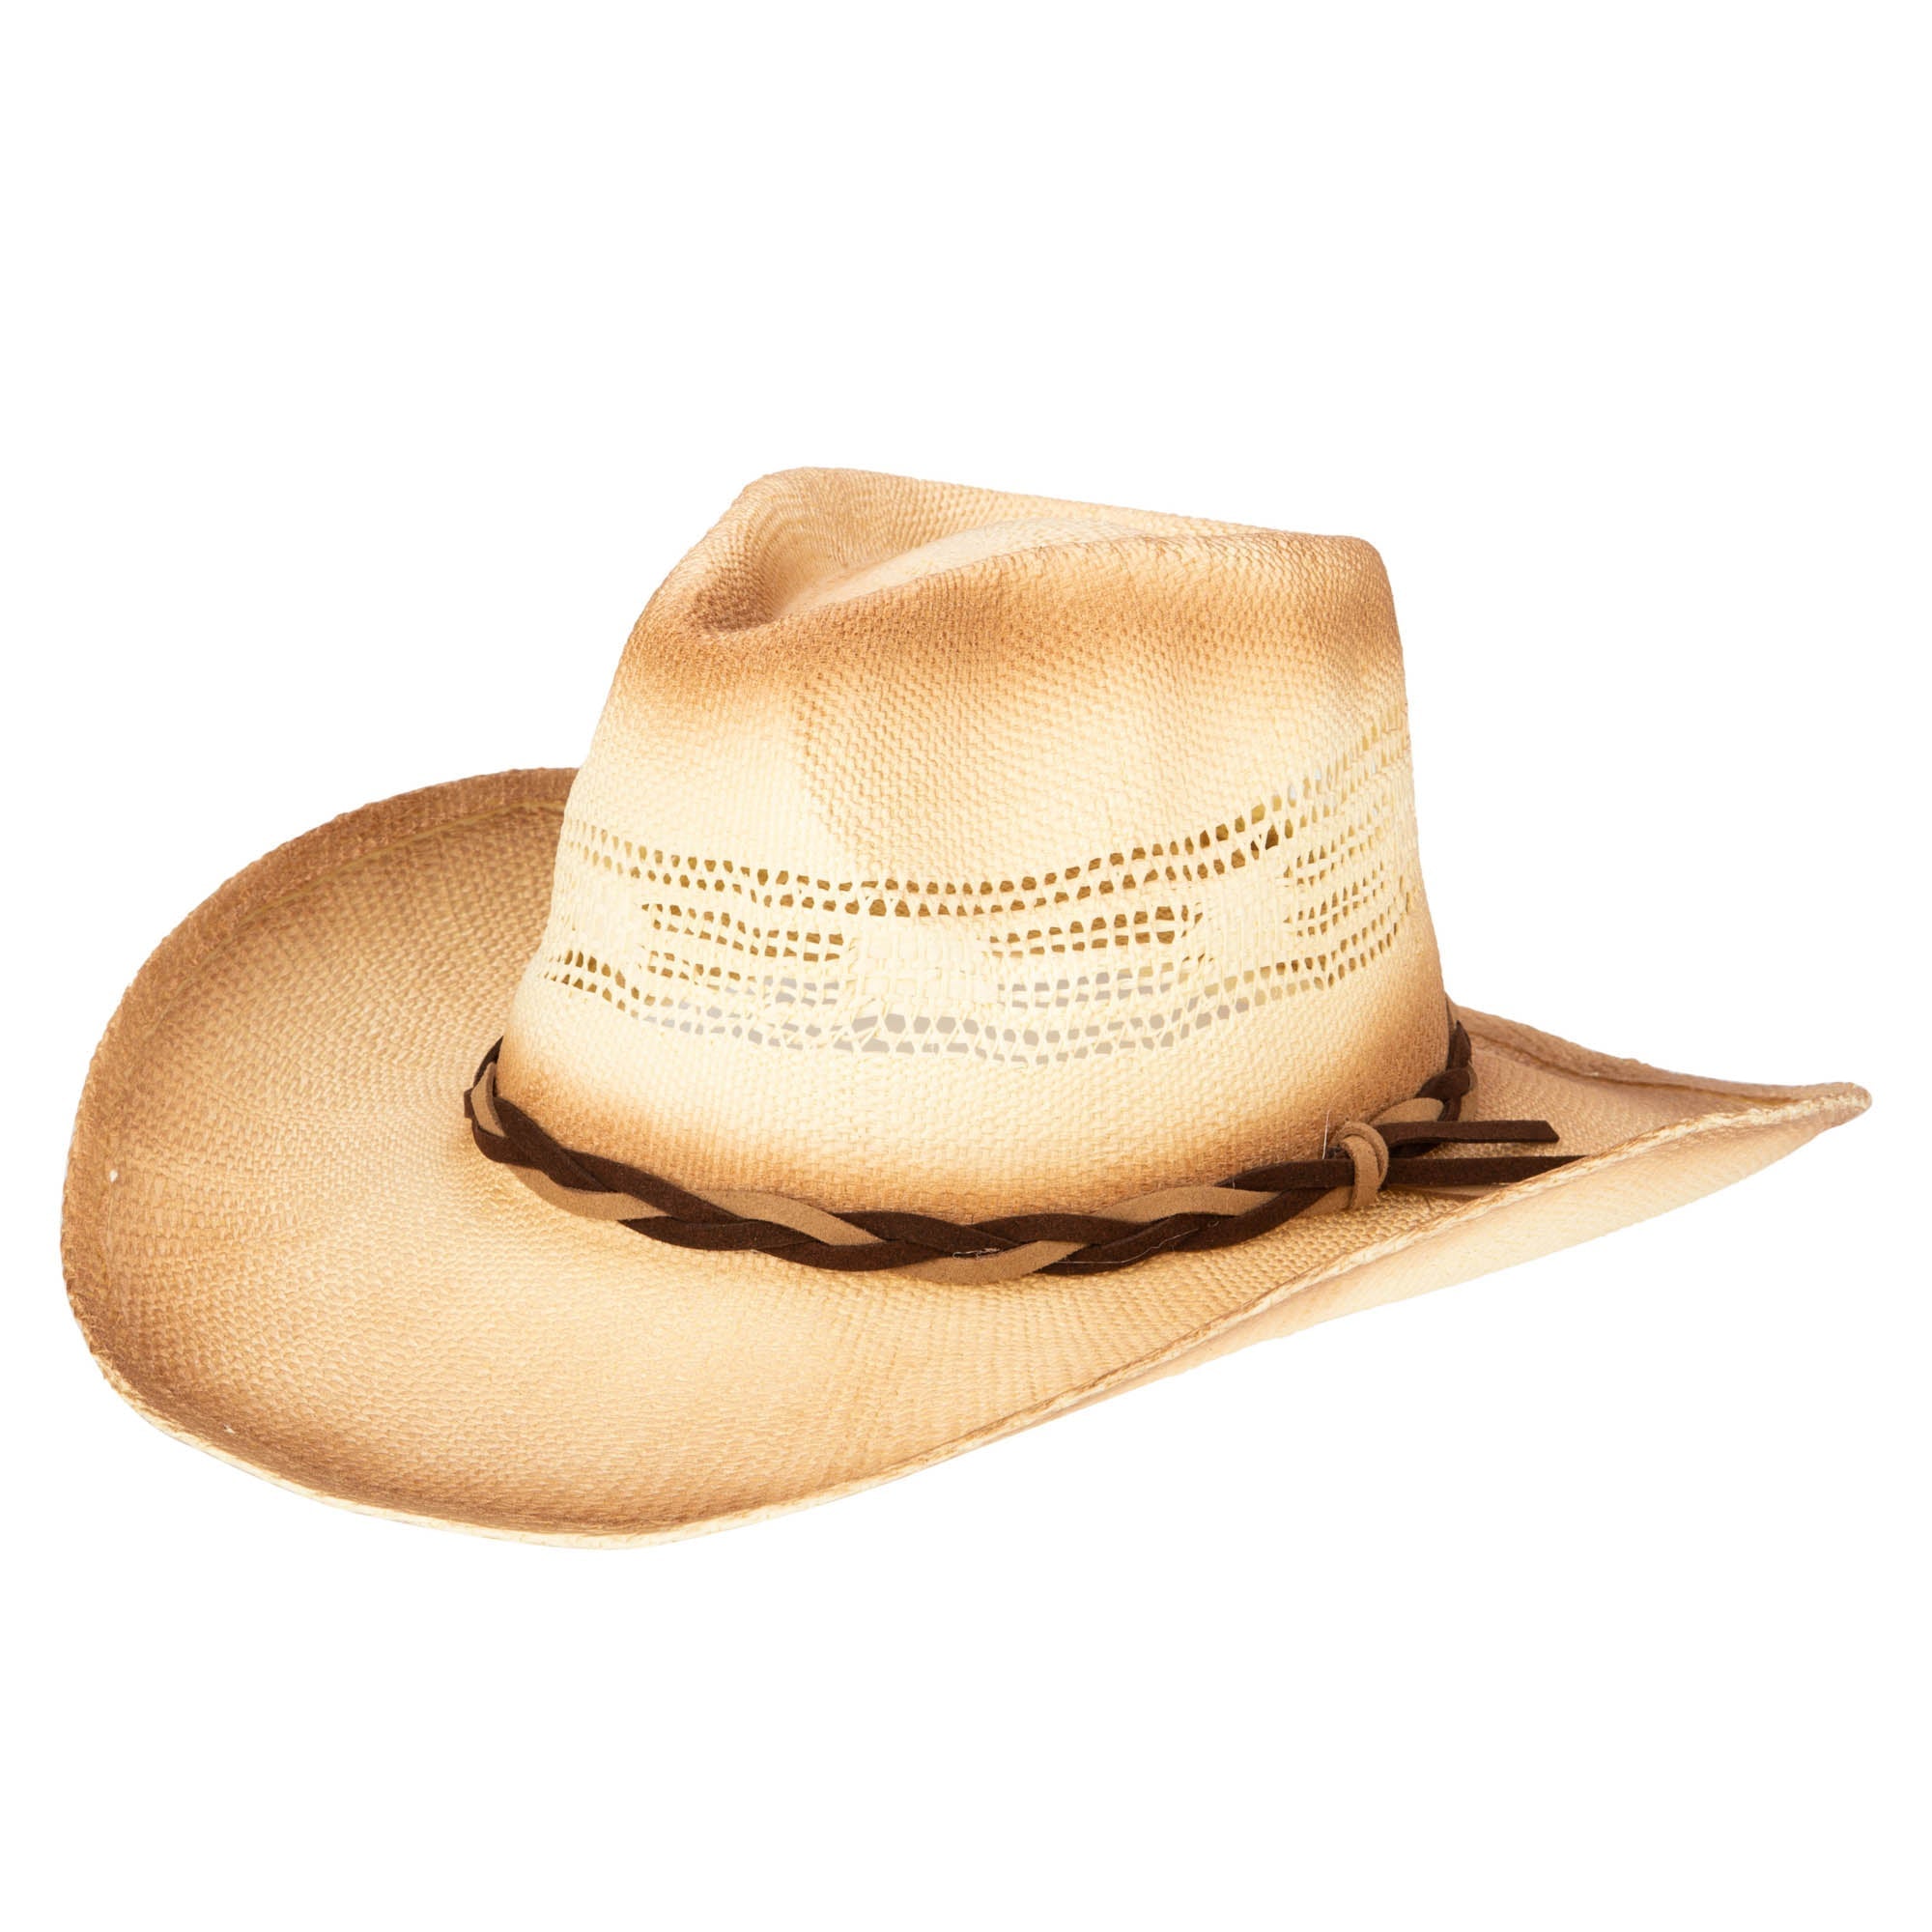 San Diego Hat Company Down to Earth - Woven Paper Cowboy, Toast, One Size